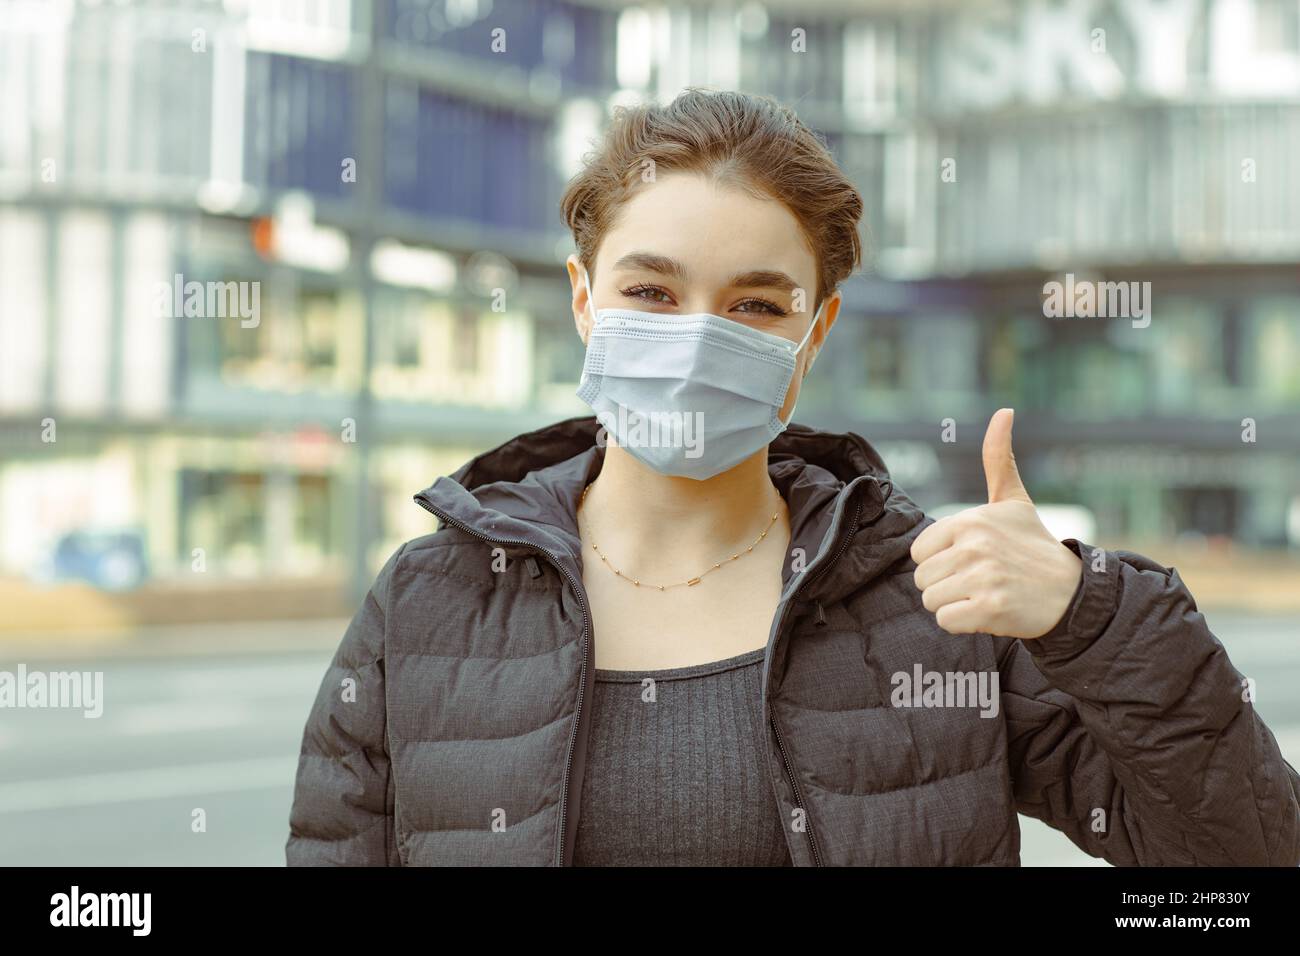 Portrait of a young woman wearing a face mask standing on a street giving a thumbs up gesture Stock Photo